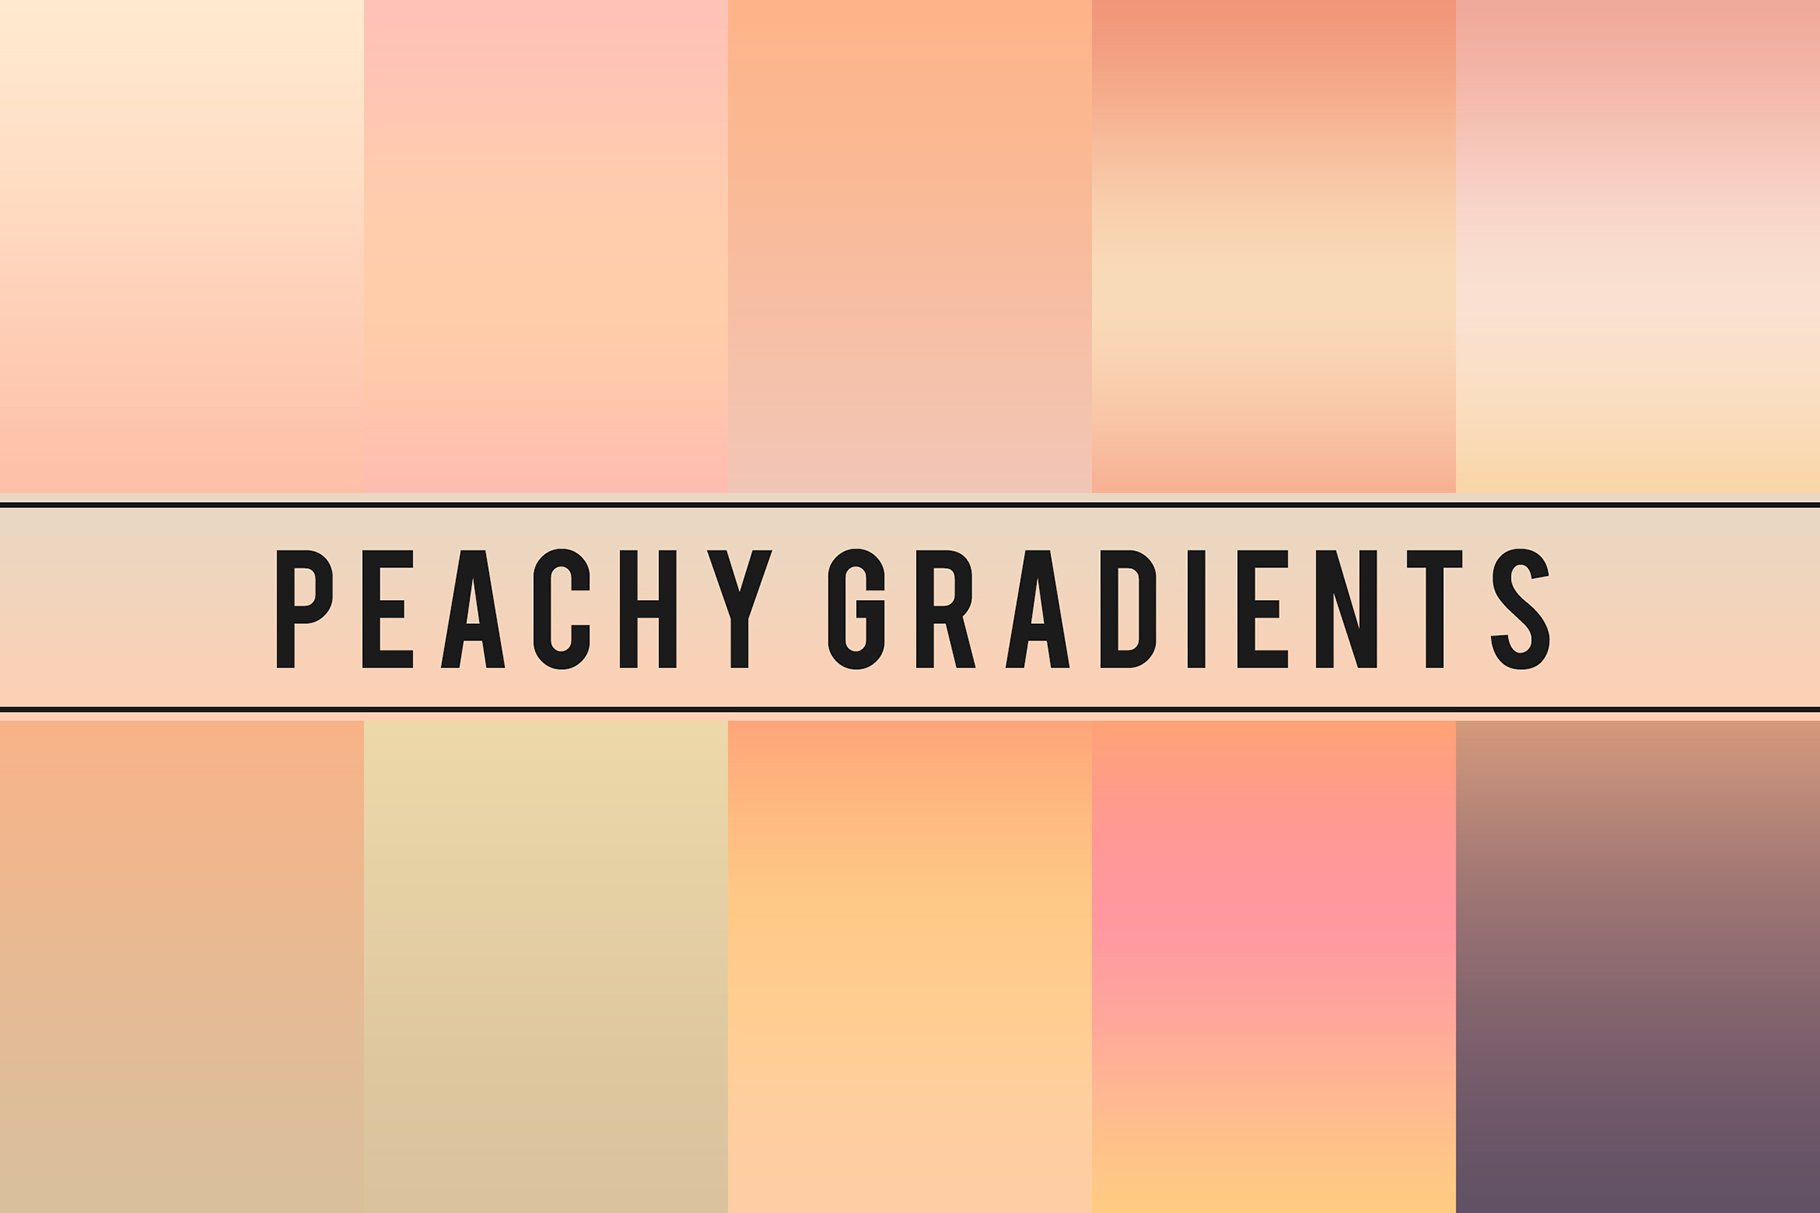 Peachy Gradientscover image.